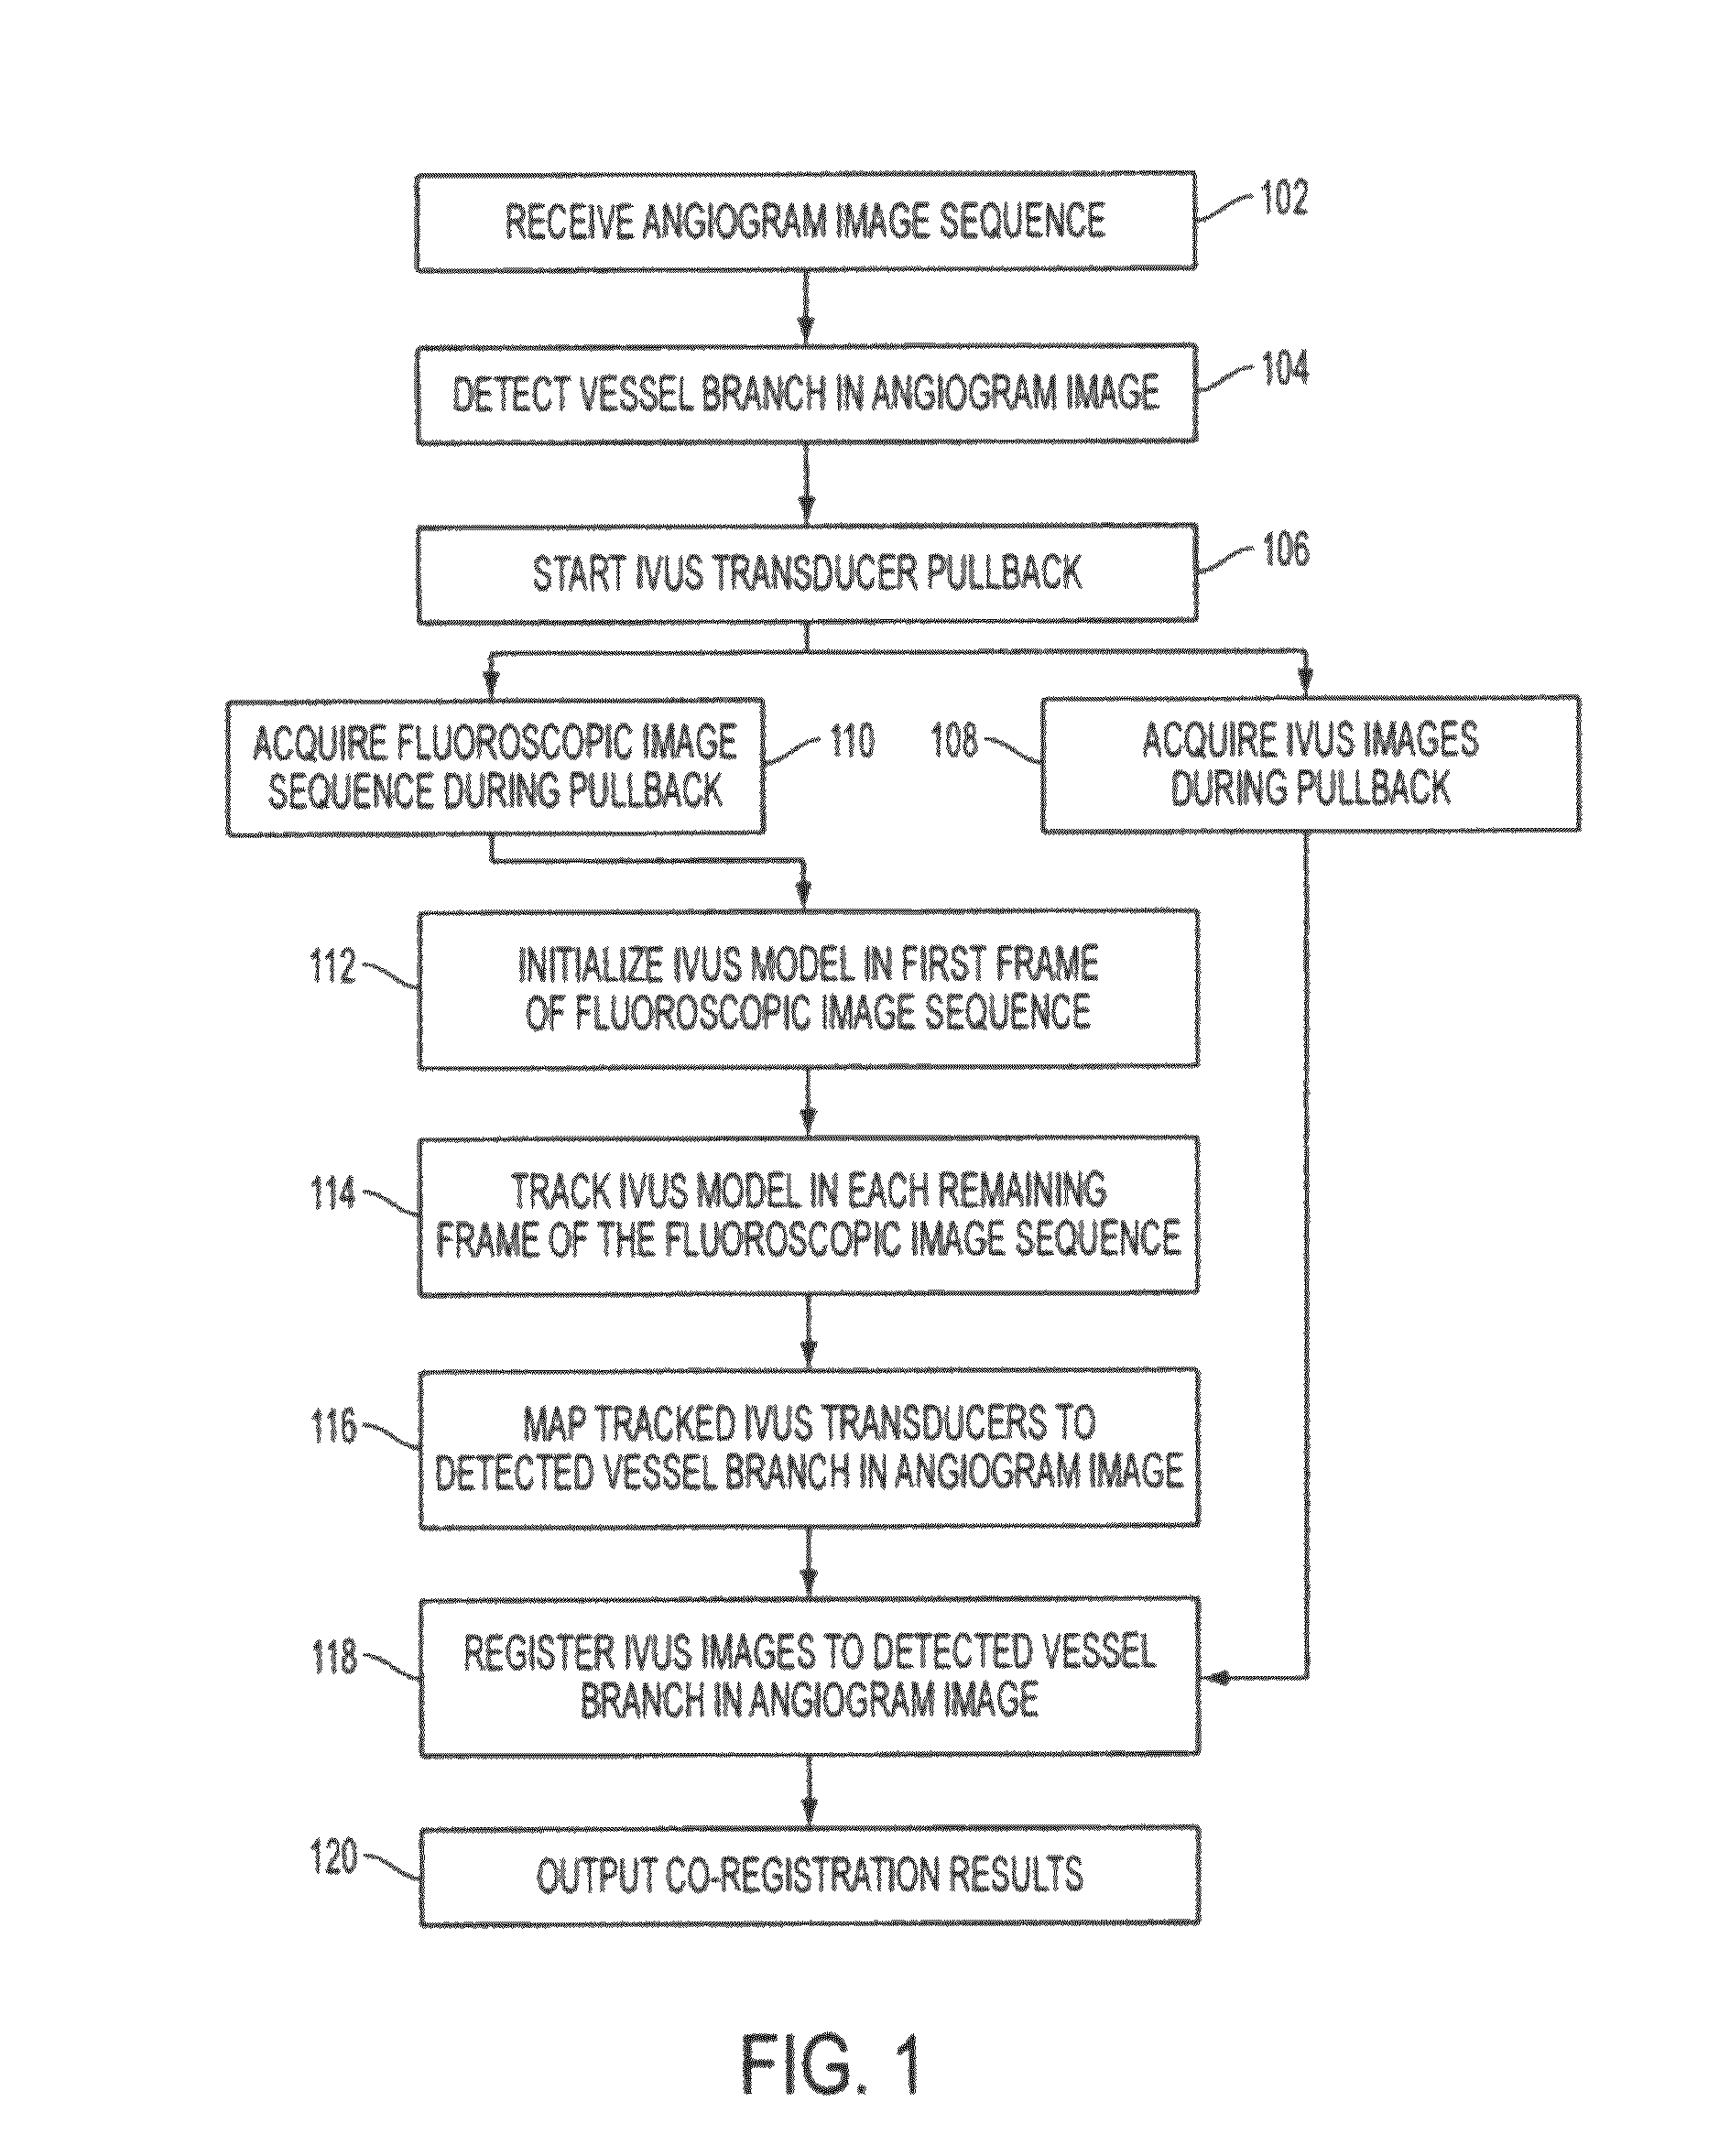 Method and system for image based device tracking for co-registration of angiography and intravascular ultrasound images